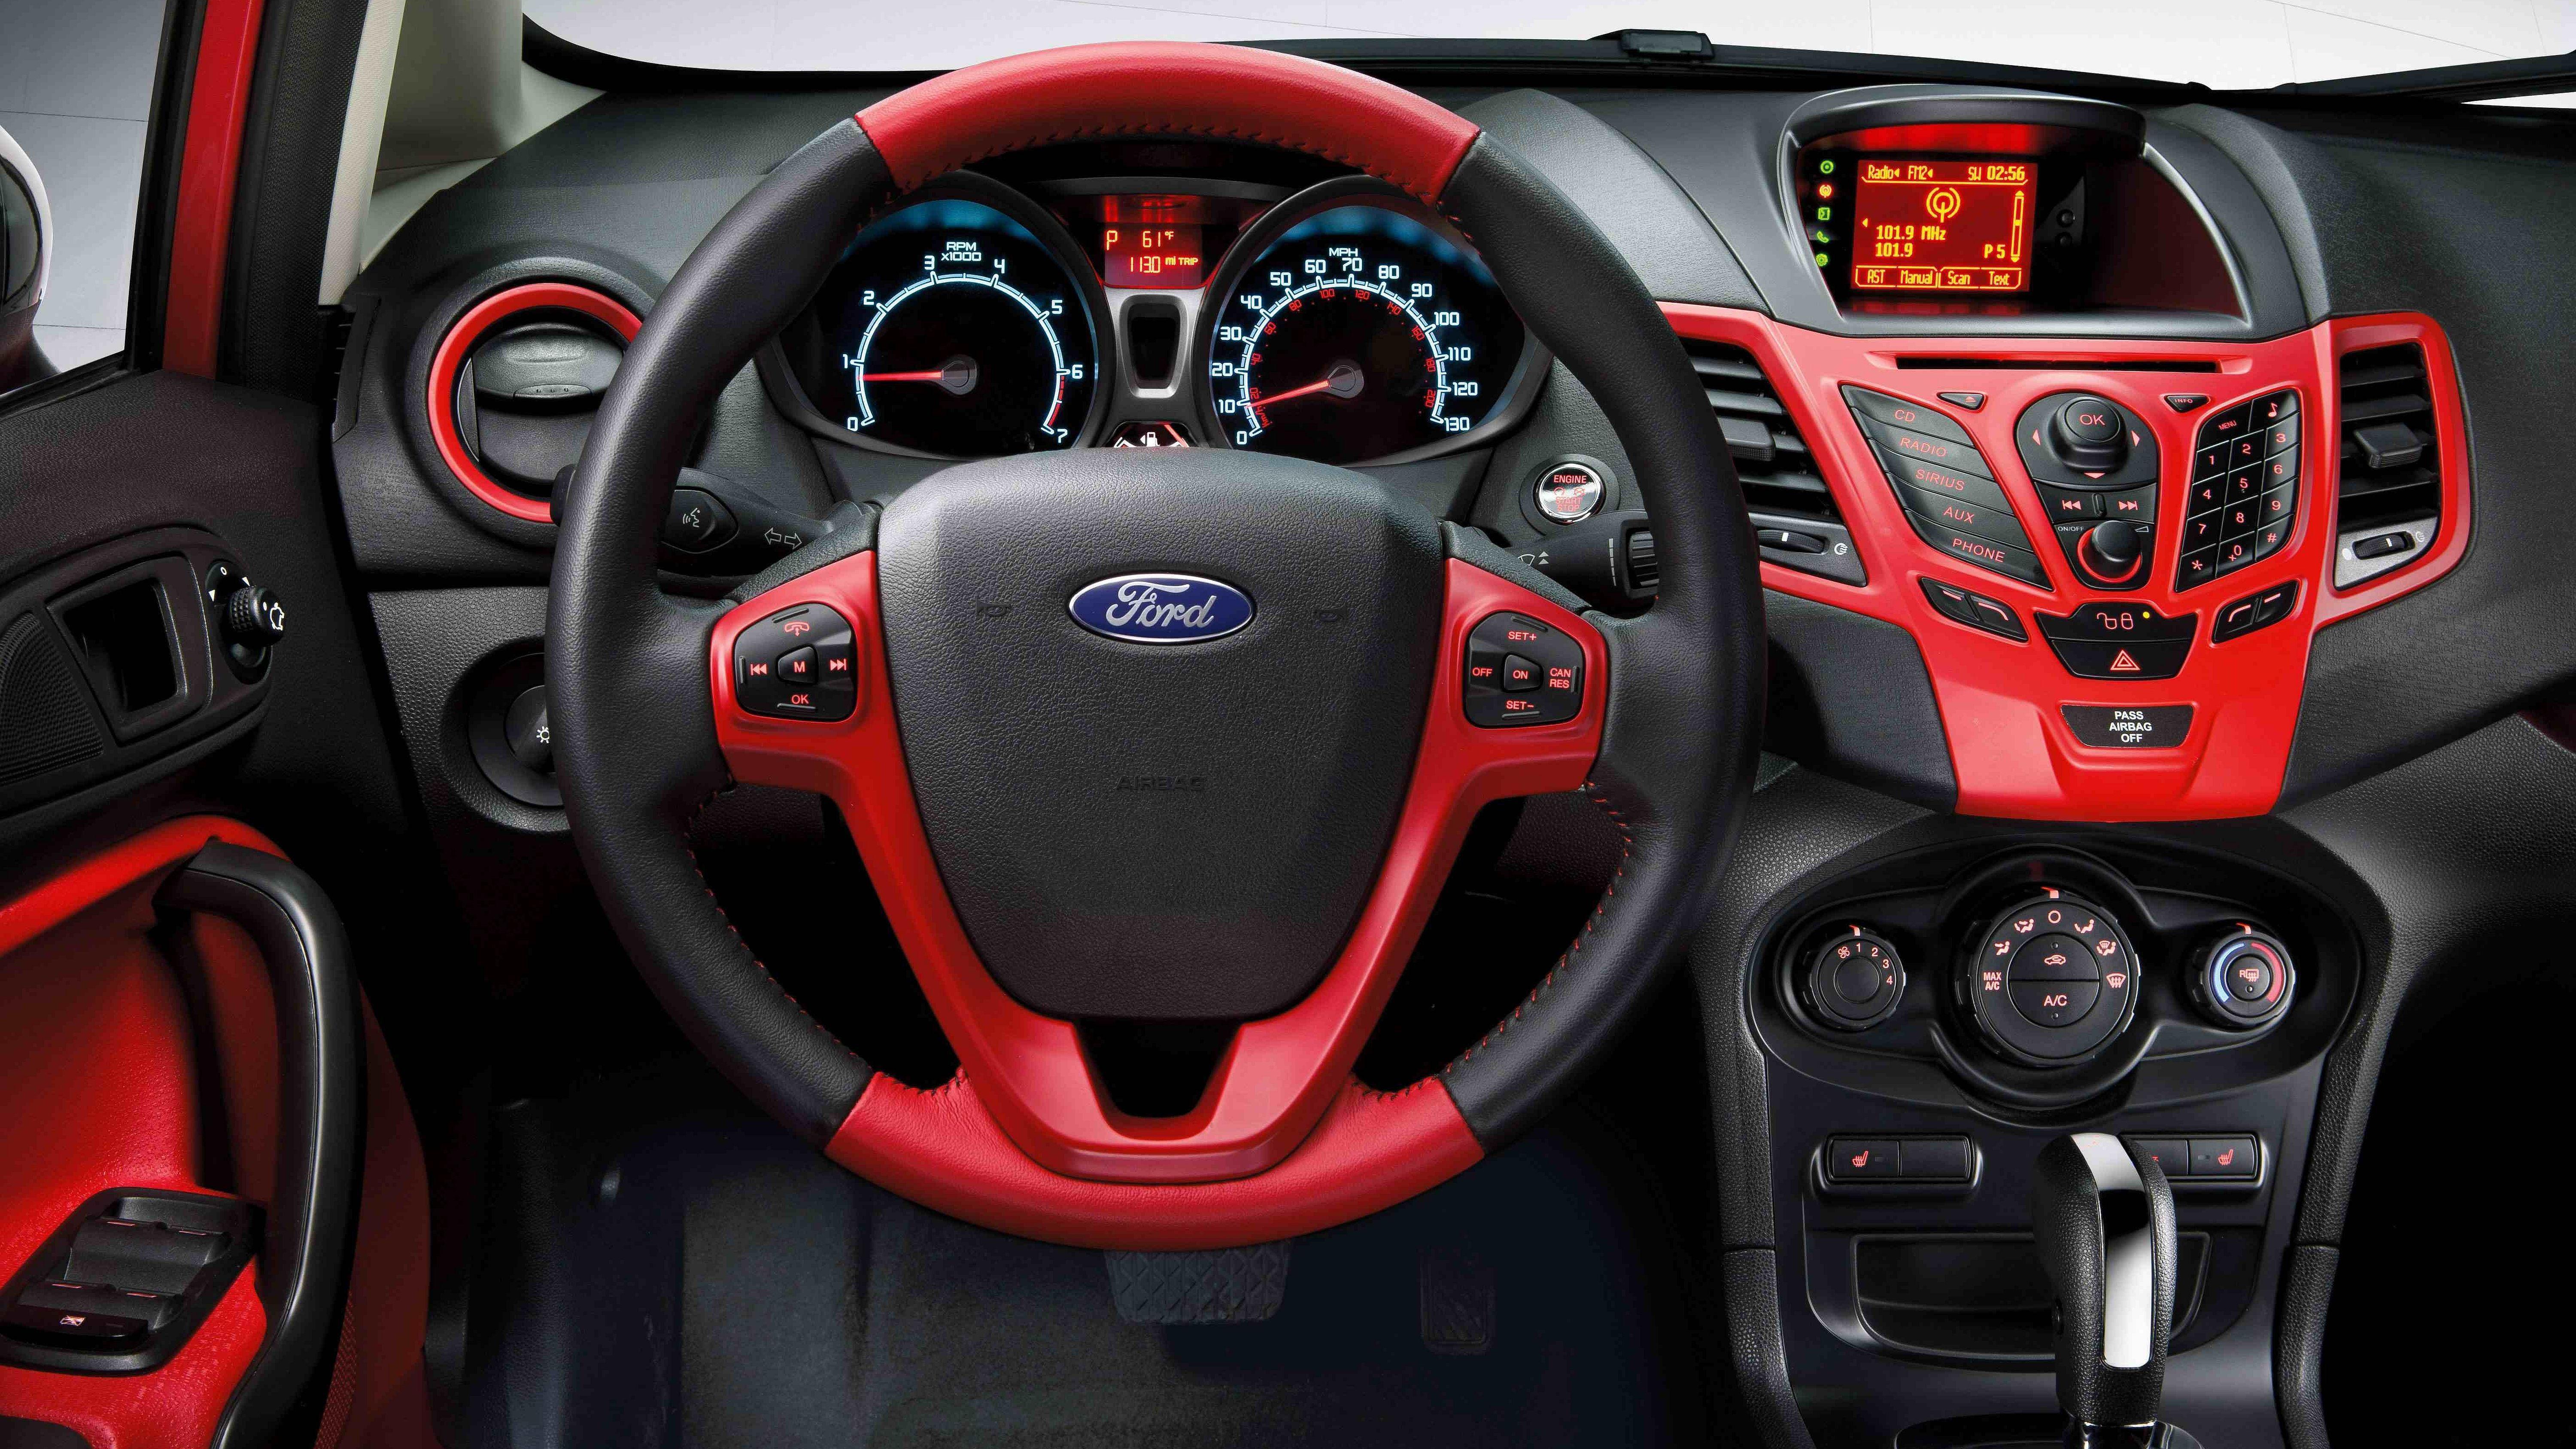 Ford Fiesta HD Wallpaper and Background Image